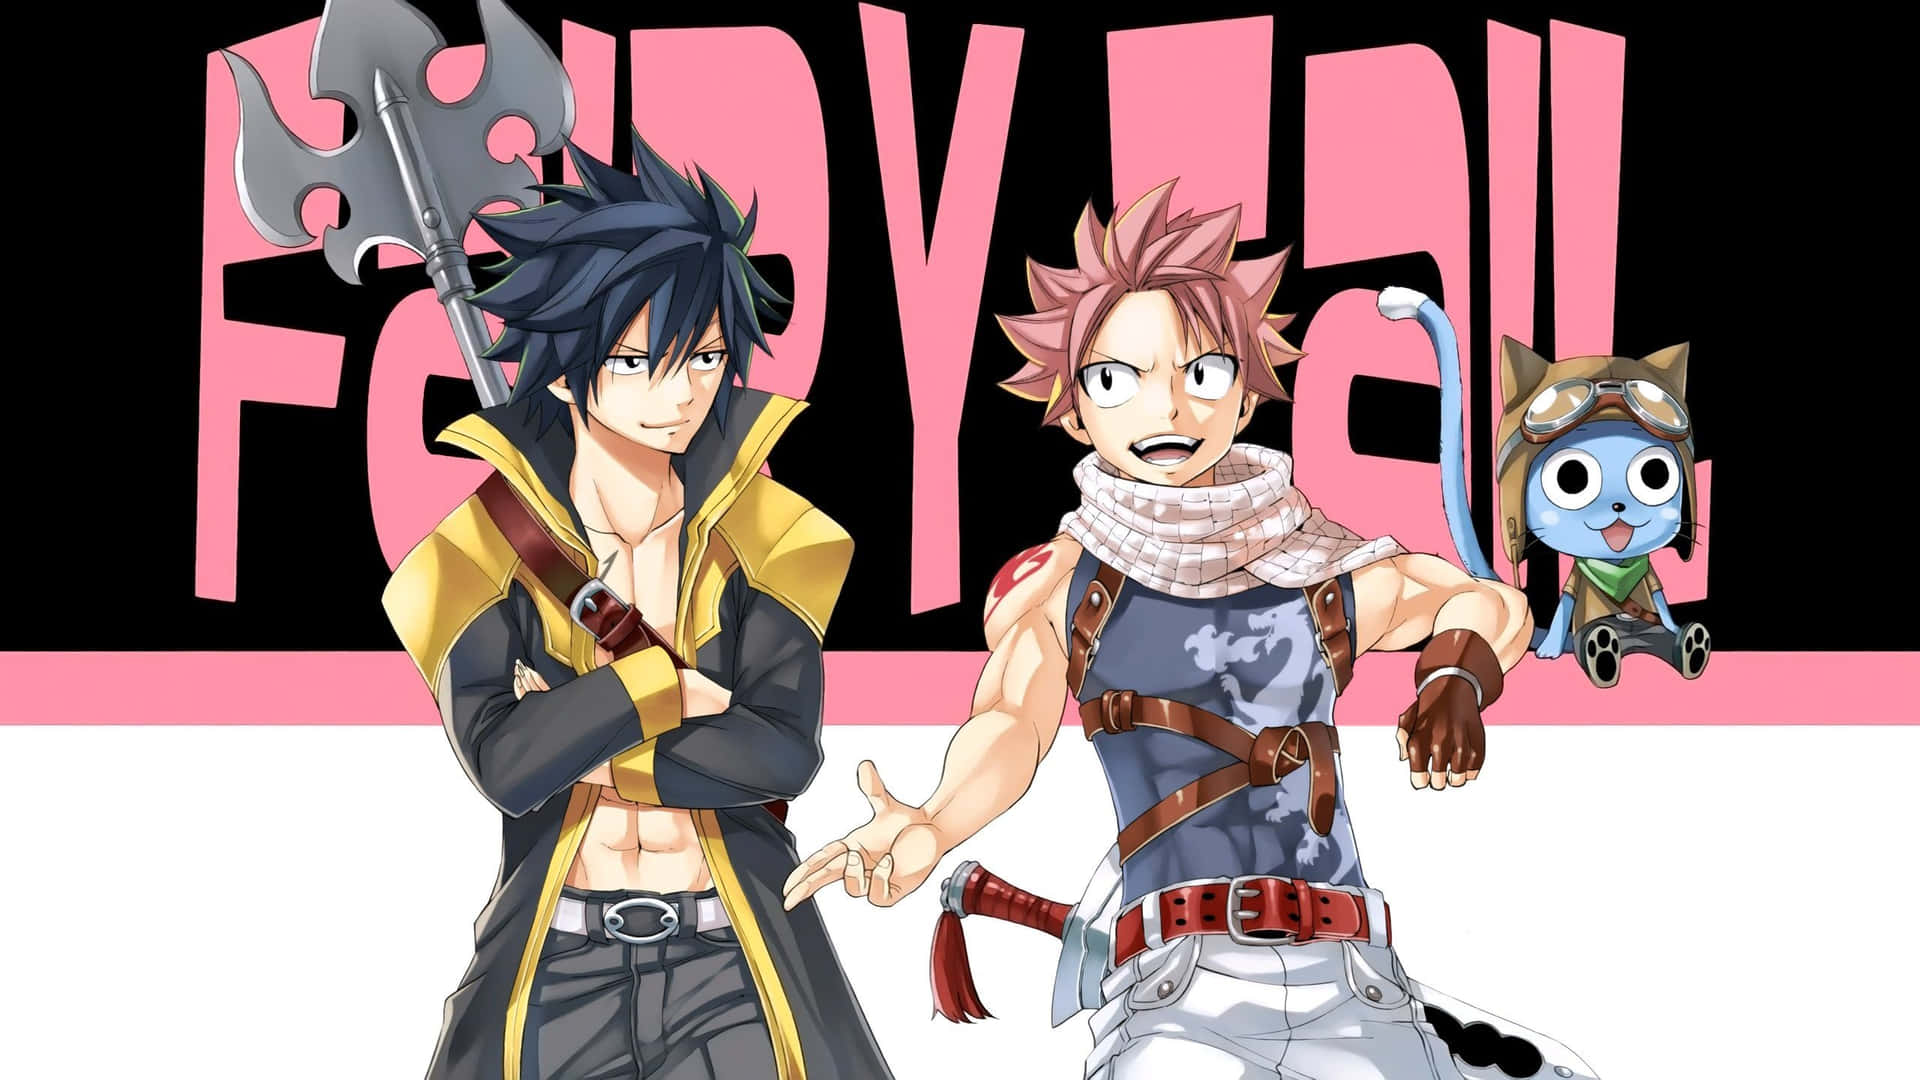 "The world-renowned Fairy Tail Guild, renowned for its loyalty and strength."